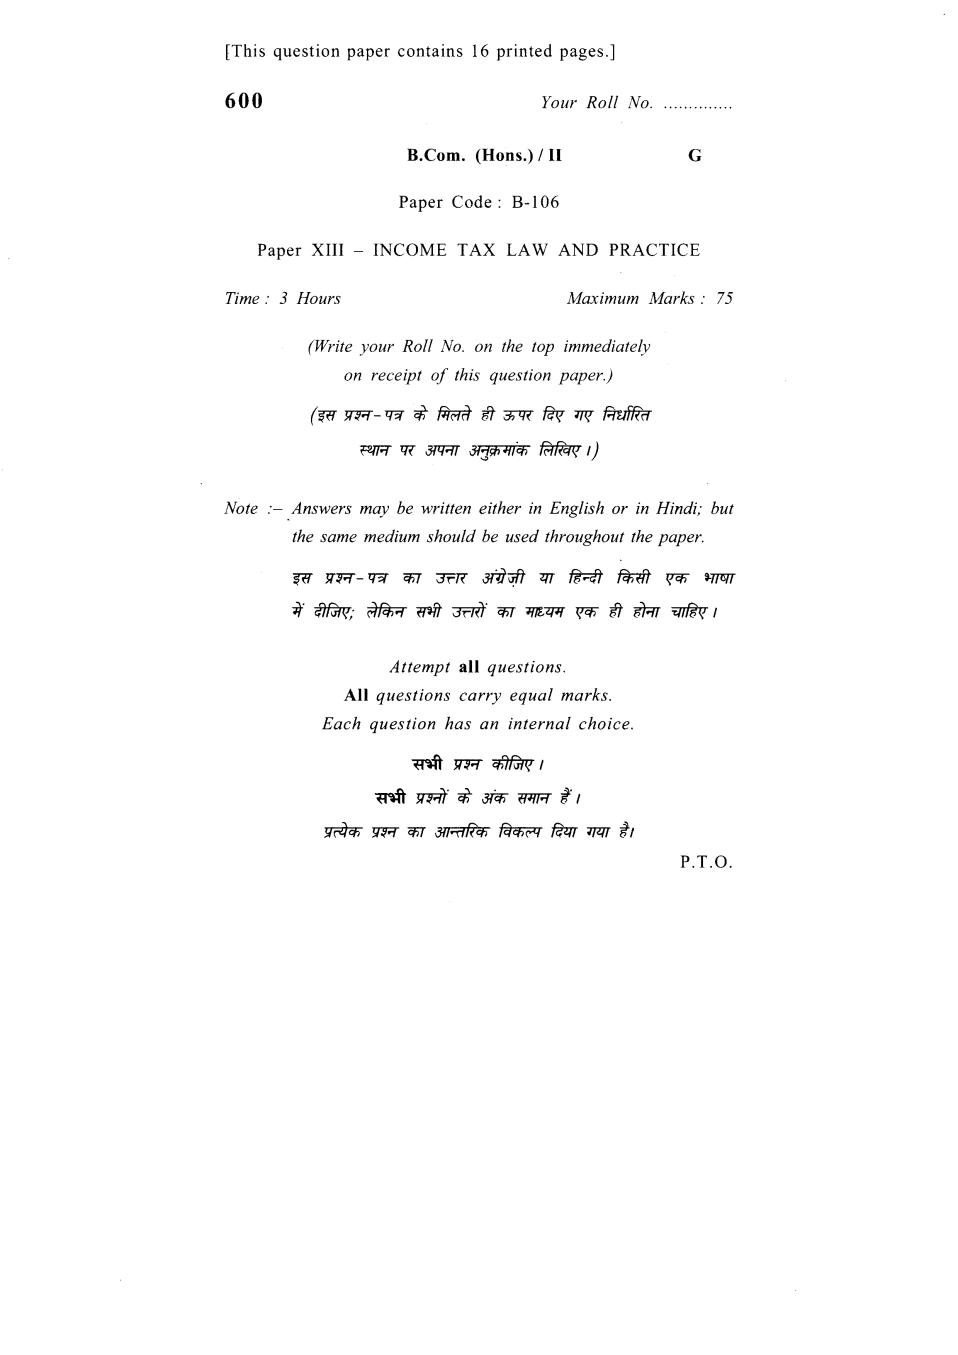 DU SOL Question Paper 2018 B.Com (Hons.) Income Tax Law and Practice - Page 1